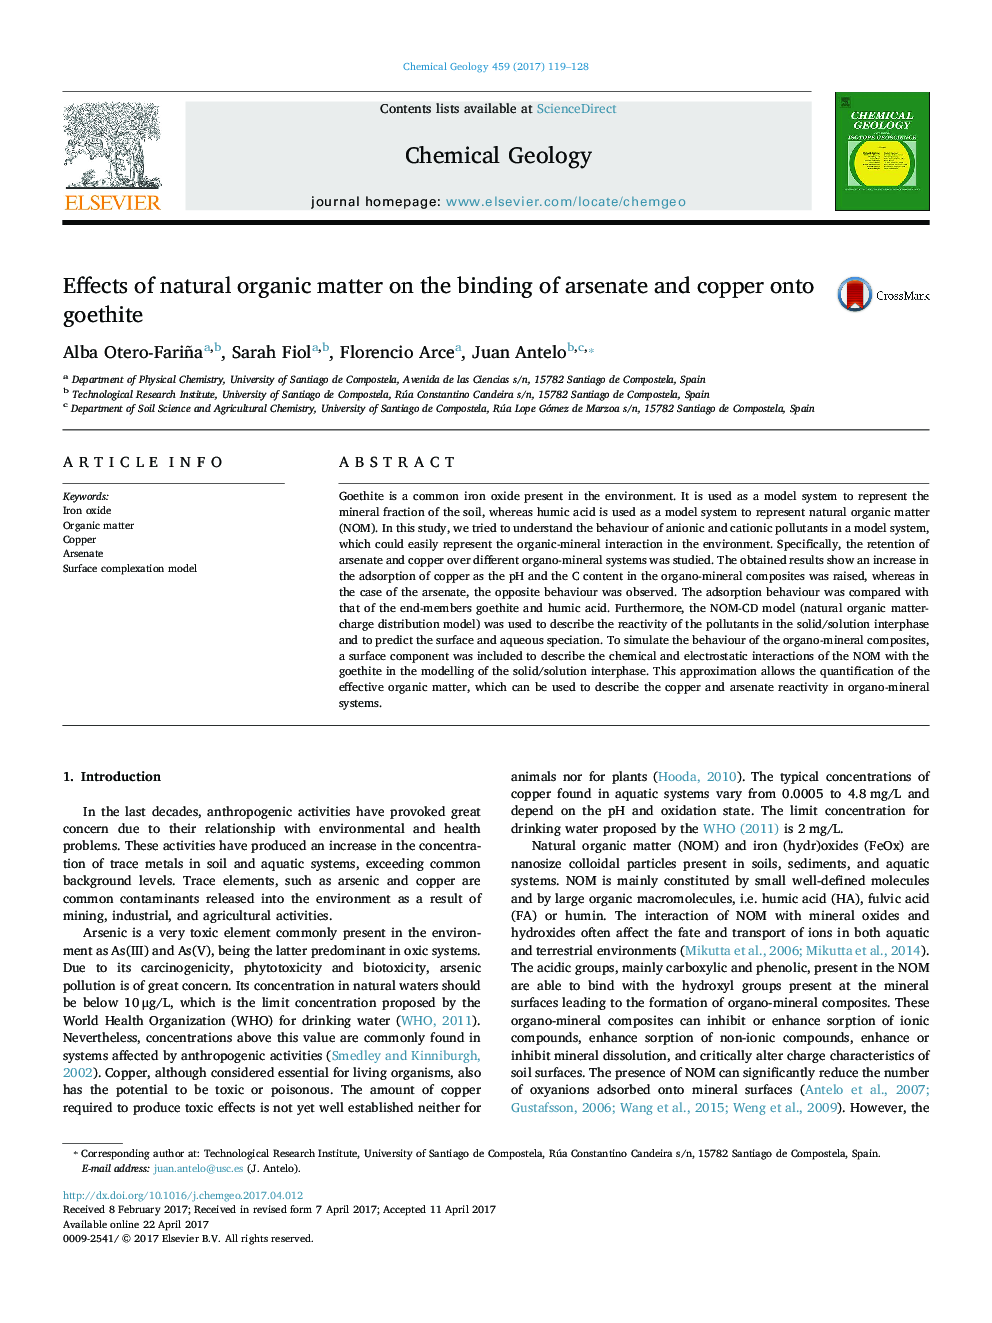 Effects of natural organic matter on the binding of arsenate and copper onto goethite